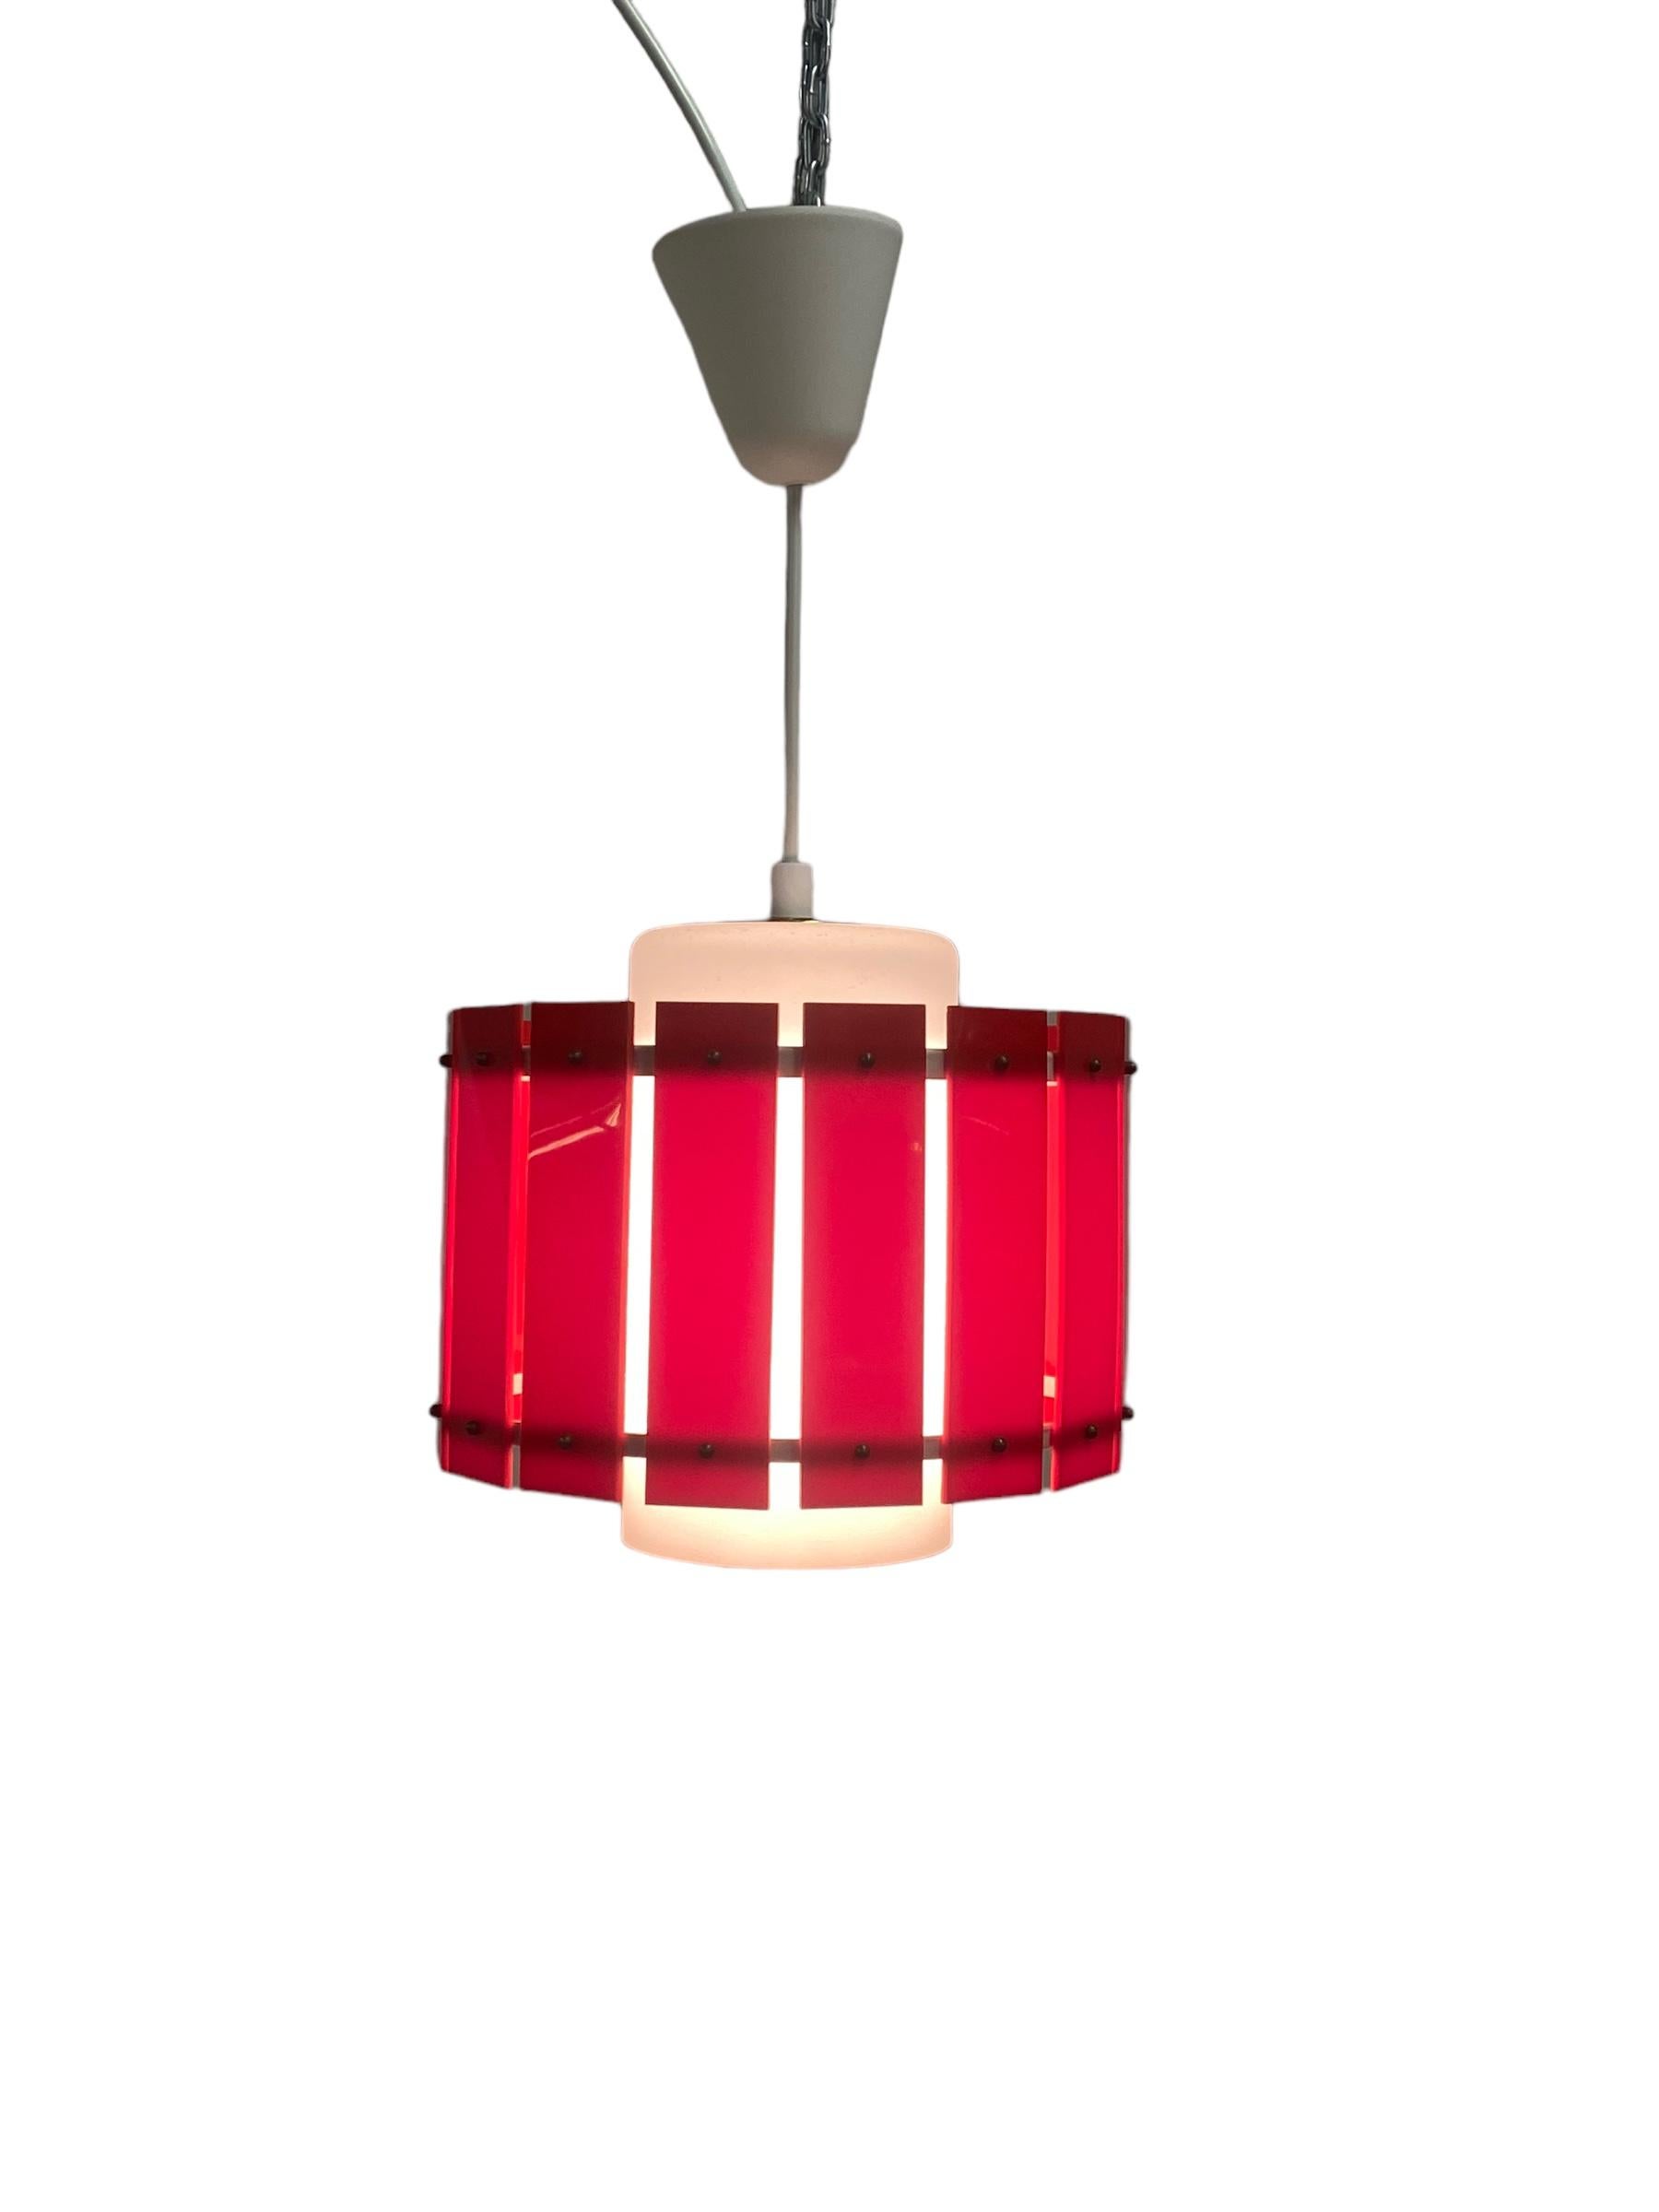 A cheerful and colourful ceiling pendant by Maria Lindeman for Idman. Already designed in the late 1950s and featured in the 1961 Idman catalogue, this lamp combines a frosted glass shade with a hard plastic outer shade that makes it all more